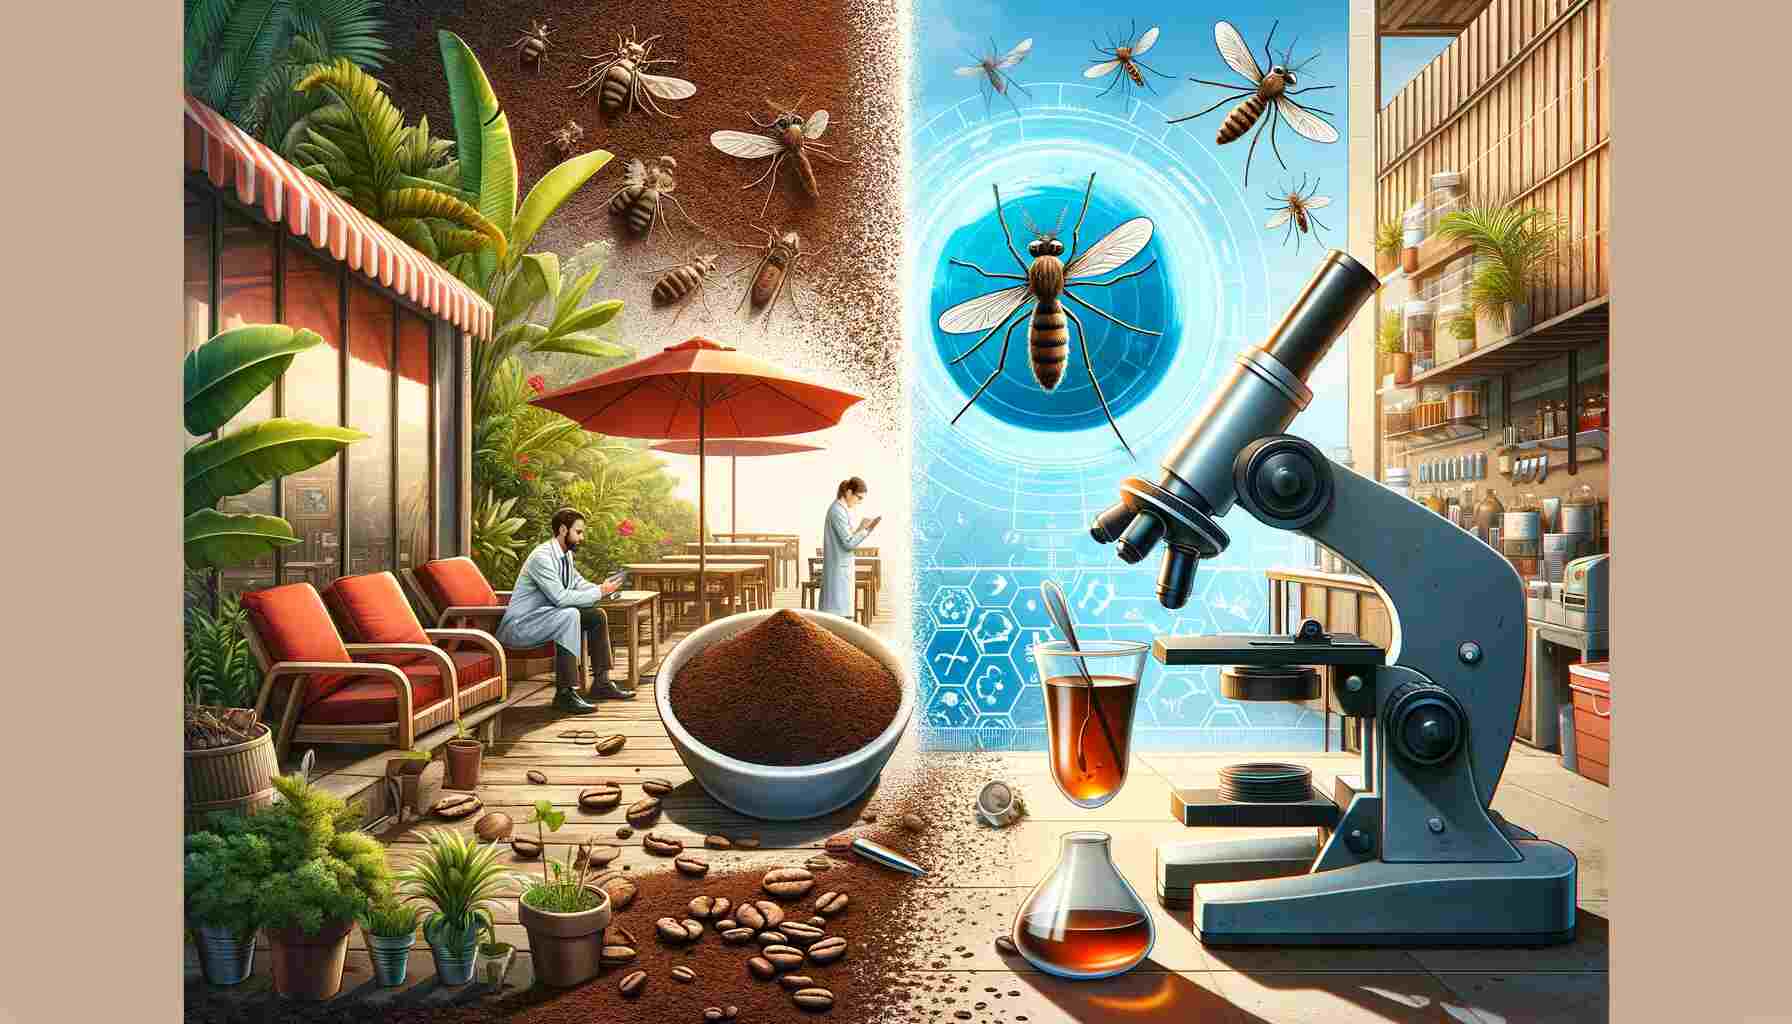 Featured image for Can Coffee Grounds Keep Mosquitoes Away: Unraveling the Myth & Science. The image is divided into two contrasting scenes. On the left, coffee grounds are spread around a tranquil outdoor seating area with lush plants, symbolizing a mosquito-free environment. On the right, a scientific laboratory setup is depicted with a researcher examining coffee grounds under a microscope, with mosquito illustrations nearby, representing scientific inquiry into the effectiveness of coffee grounds as a mosquito repellent. The title of the article is displayed at the top of the image